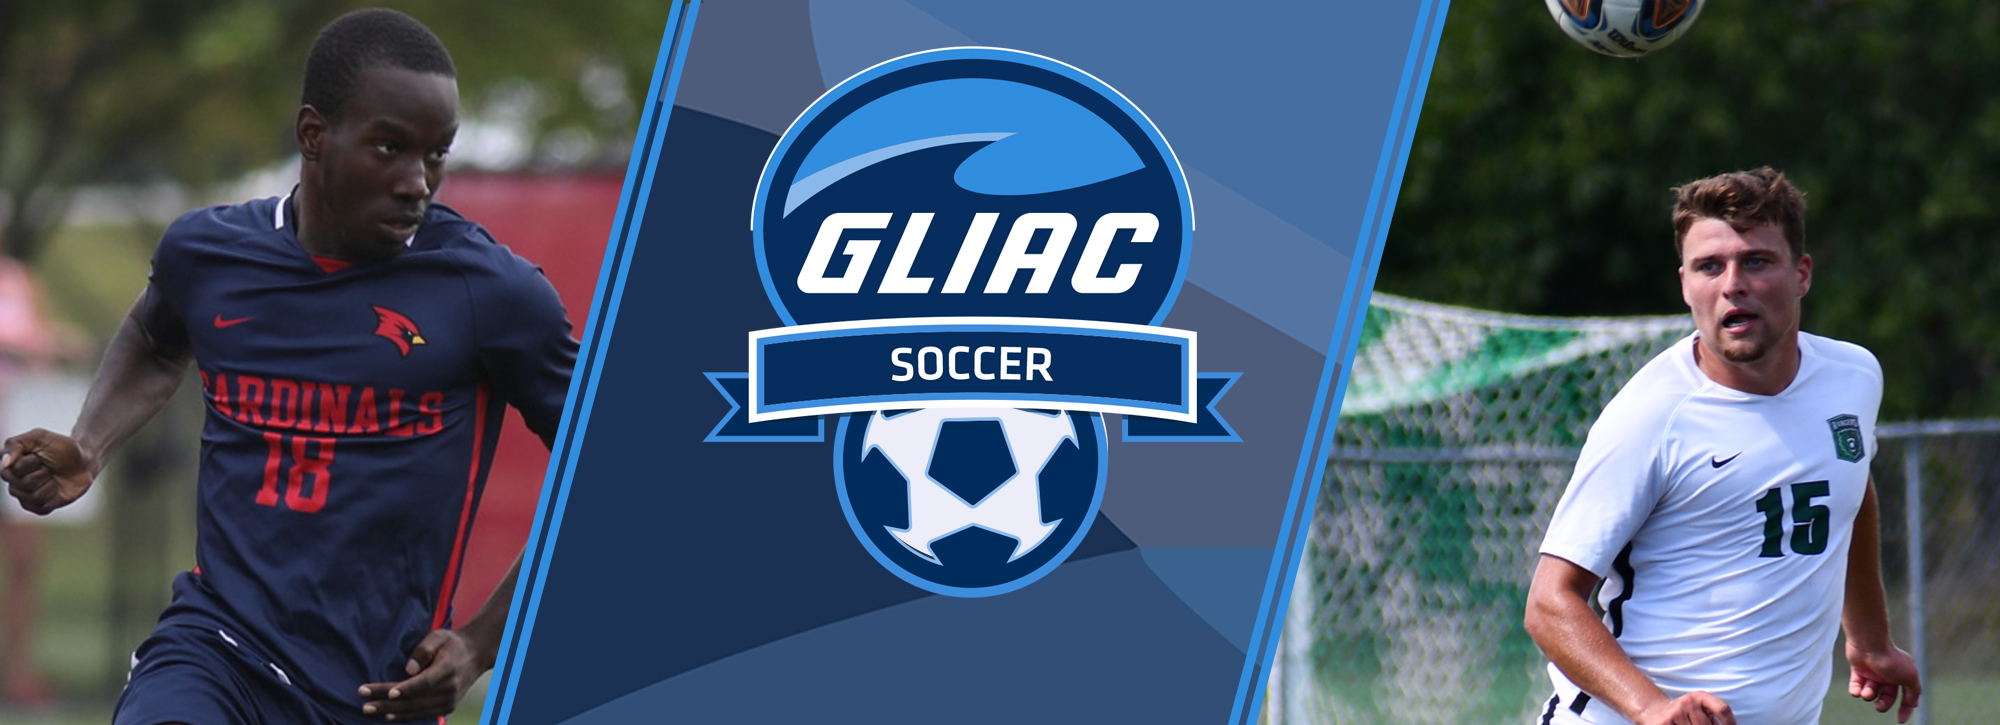 Parkside's Novakovich and SVSU's Nnolim are named men's soccer players of the week